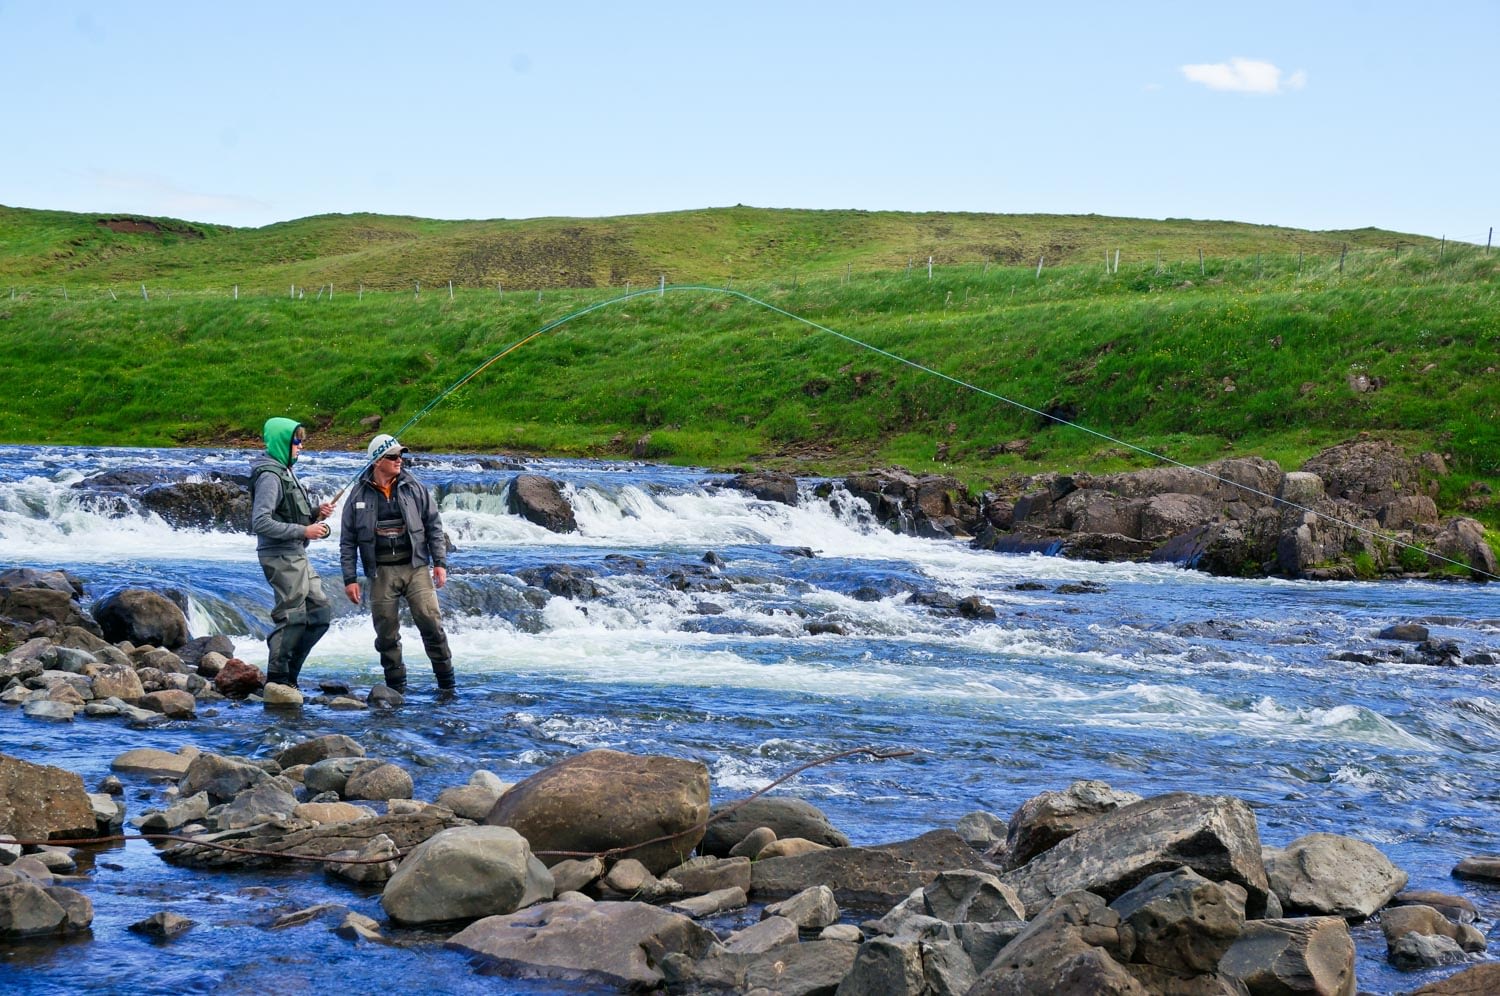 The salmon fishing in Laxa in Dolum is some of the best in the world